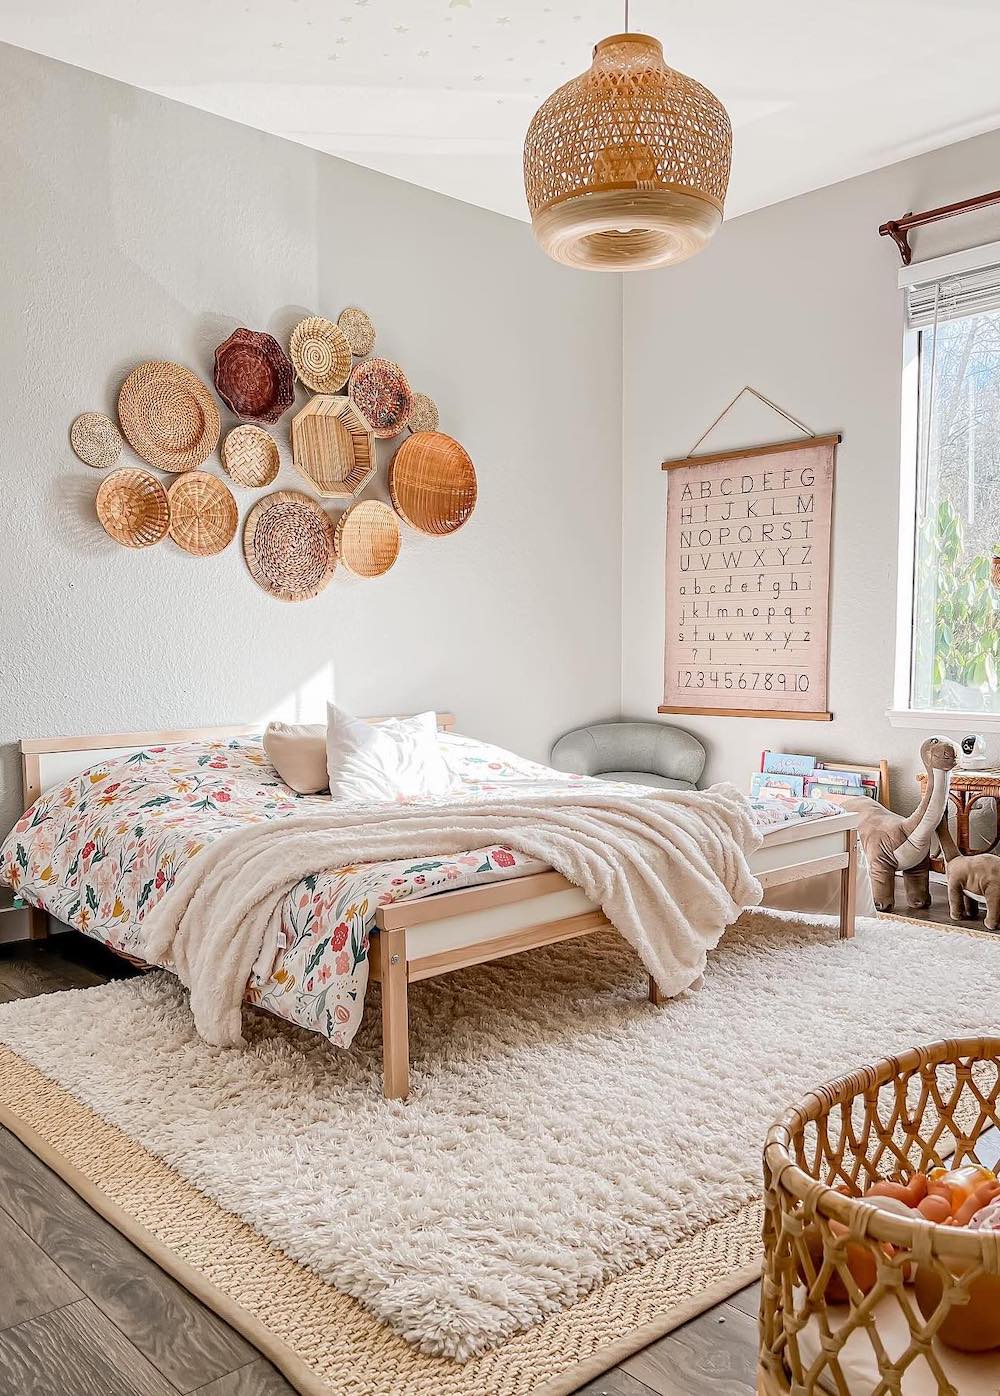 a children's bohemian bedroom with floral bedding, wall basket decor, and natural rattan accents